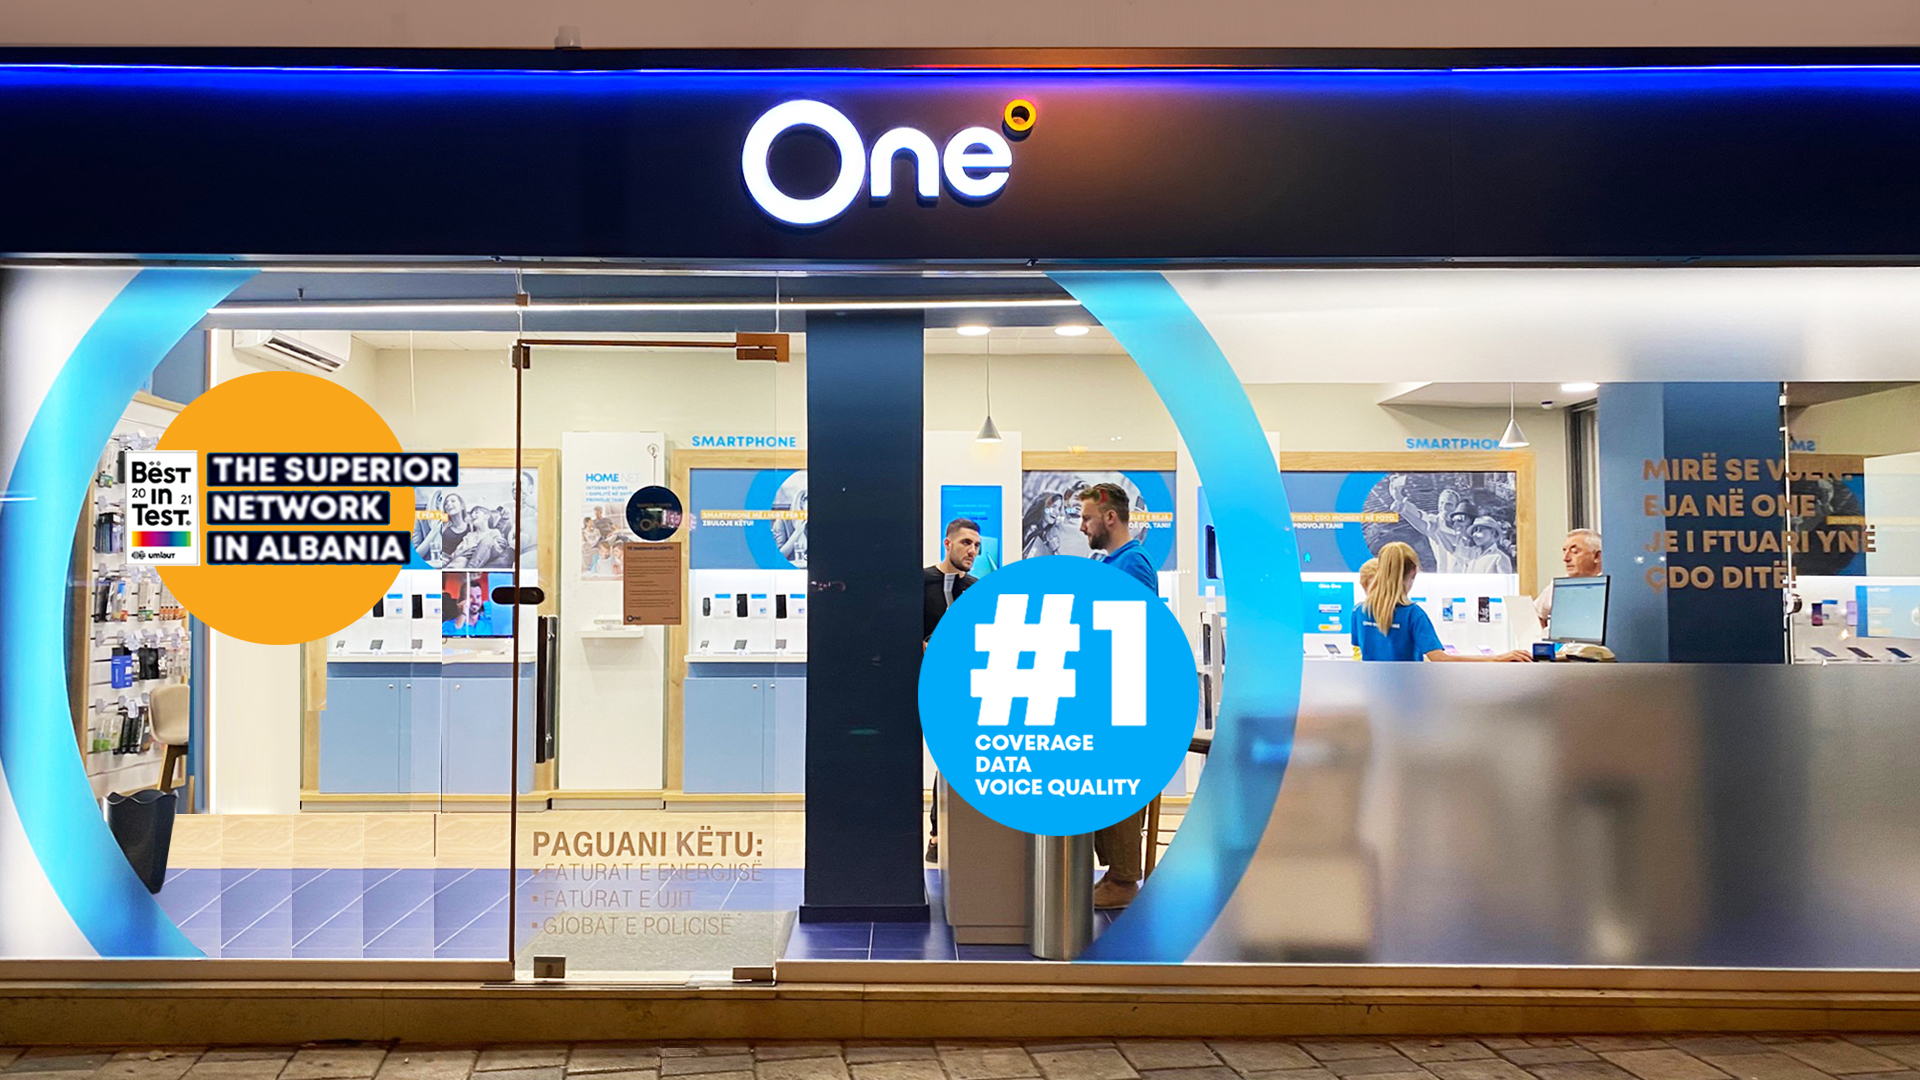 One Telecommunications - Best in Test brand campaign